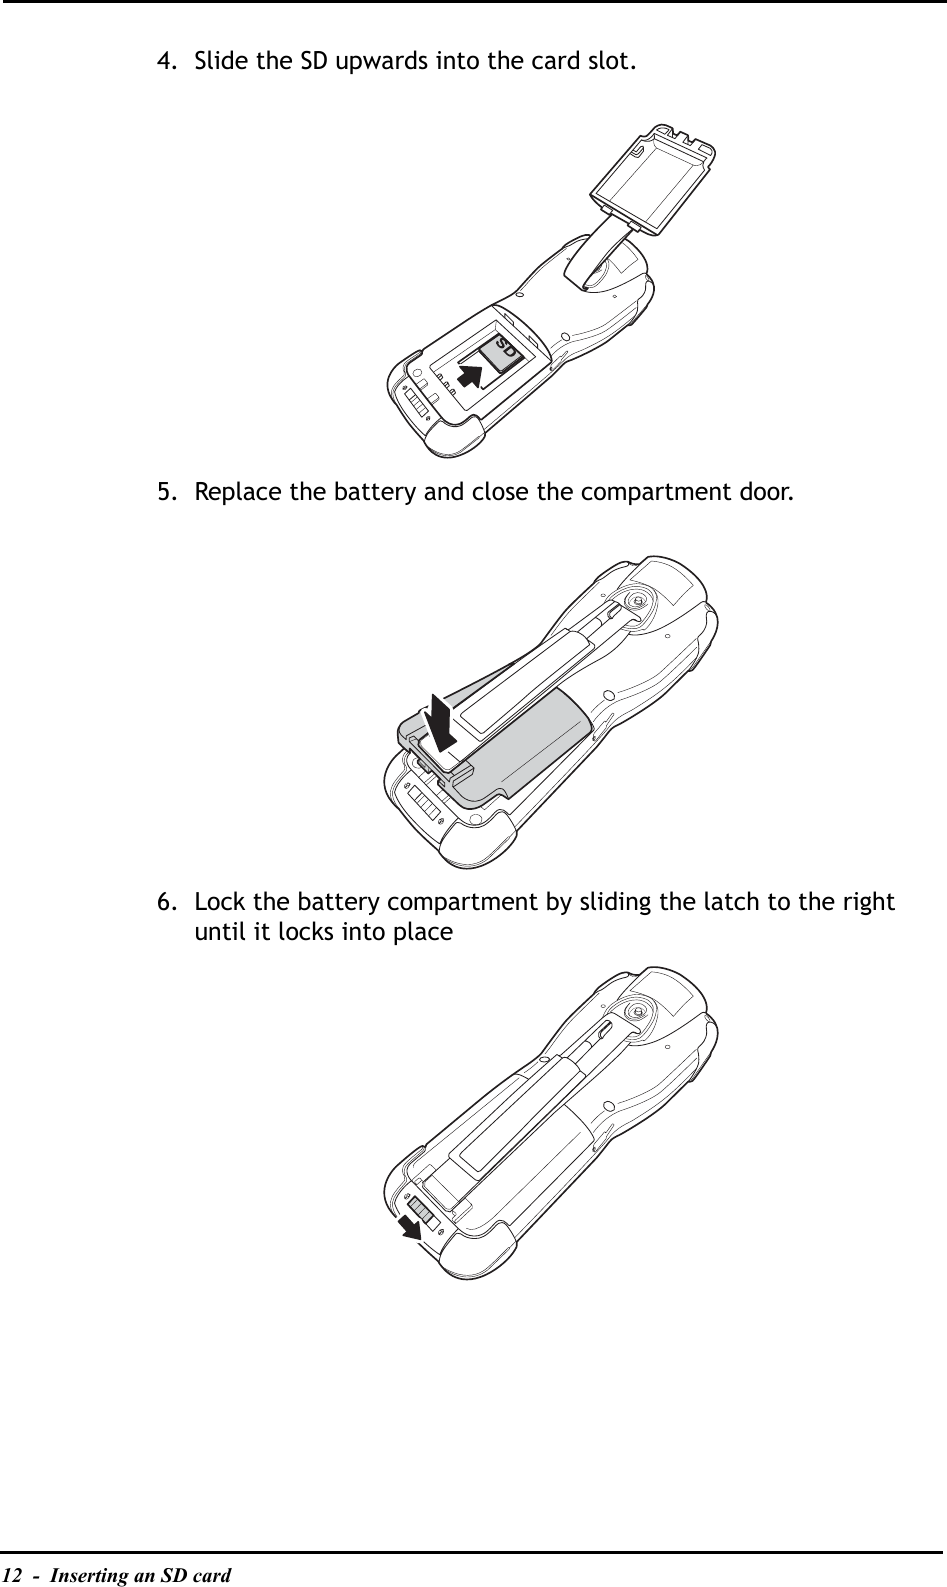 12  -  Inserting an SD card4. Slide the SD upwards into the card slot.5. Replace the battery and close the compartment door.6. Lock the battery compartment by sliding the latch to the right until it locks into place